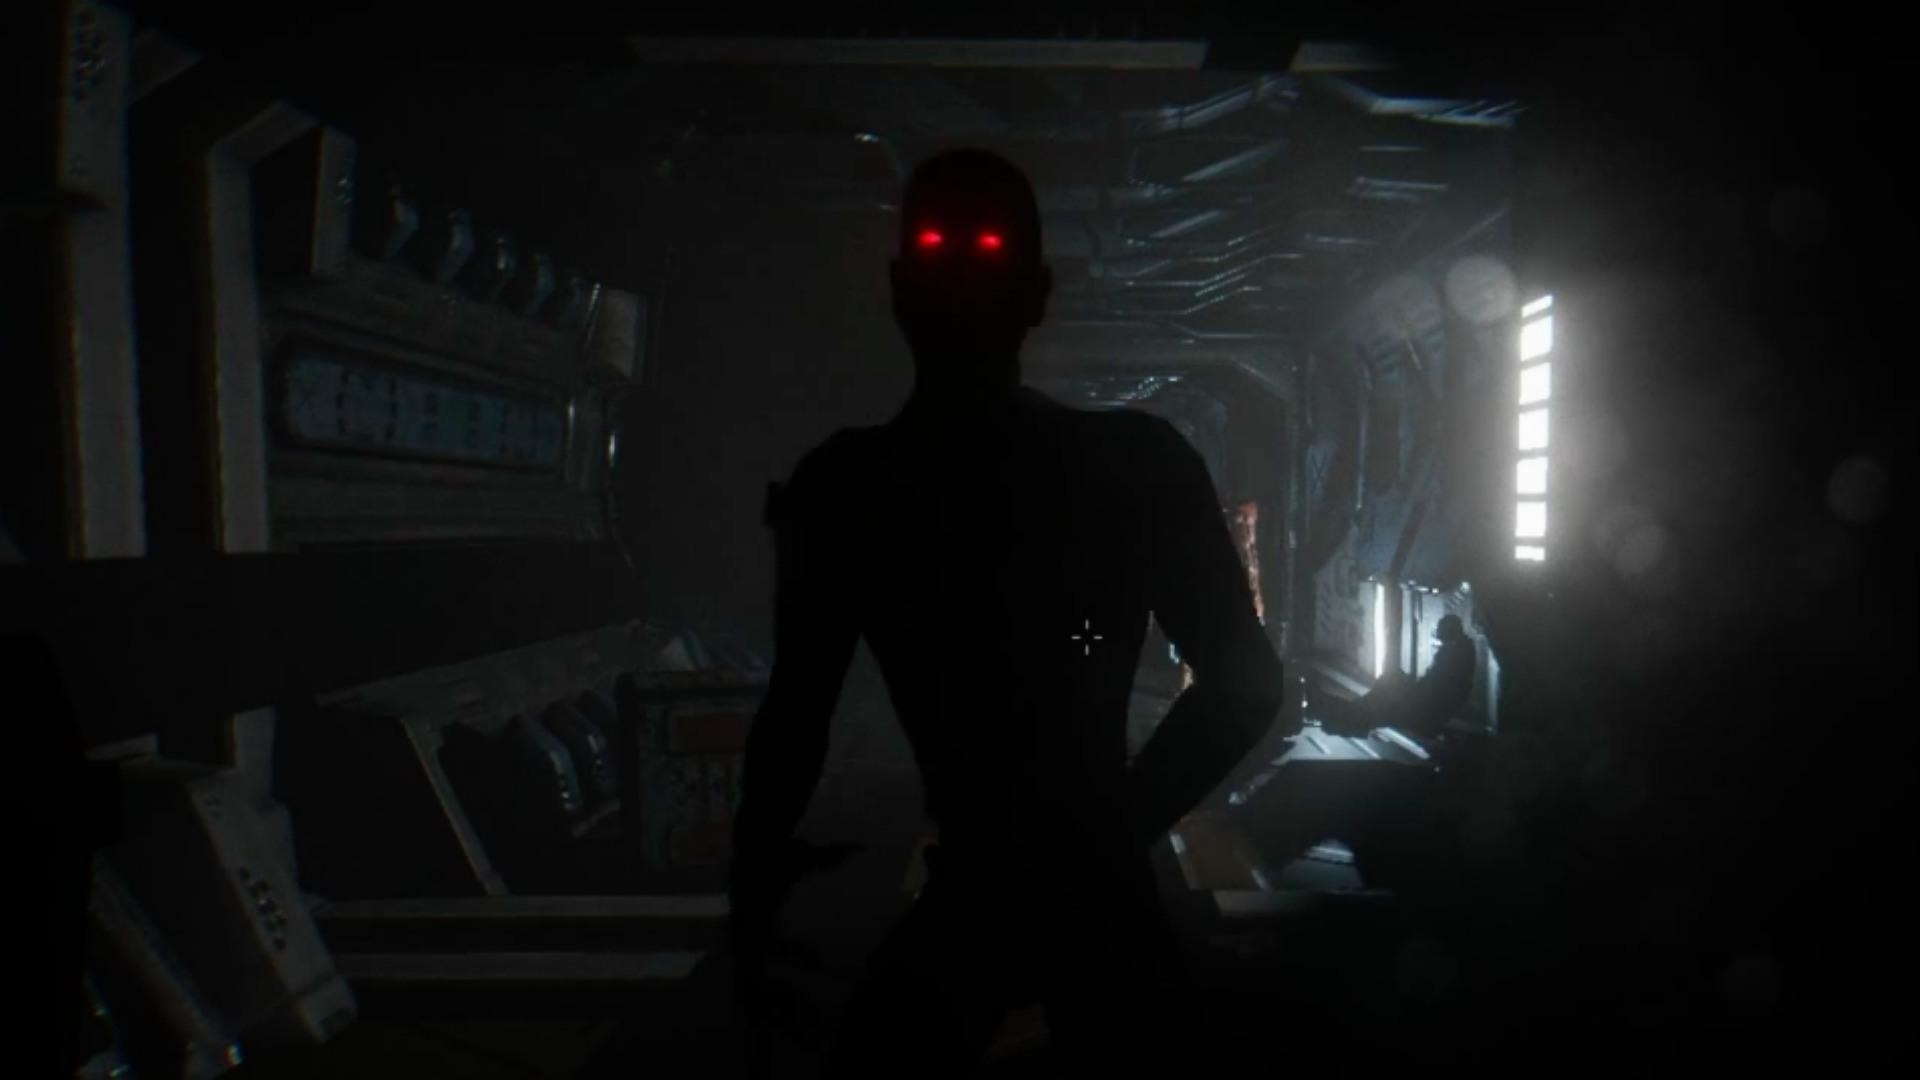 1920x1080 Bigmoon Entertainment and Camel 101 announced today that Syndrome, a  survival horror game is coming to Xbox One and PC with compatibility for  HTC Vive and ...